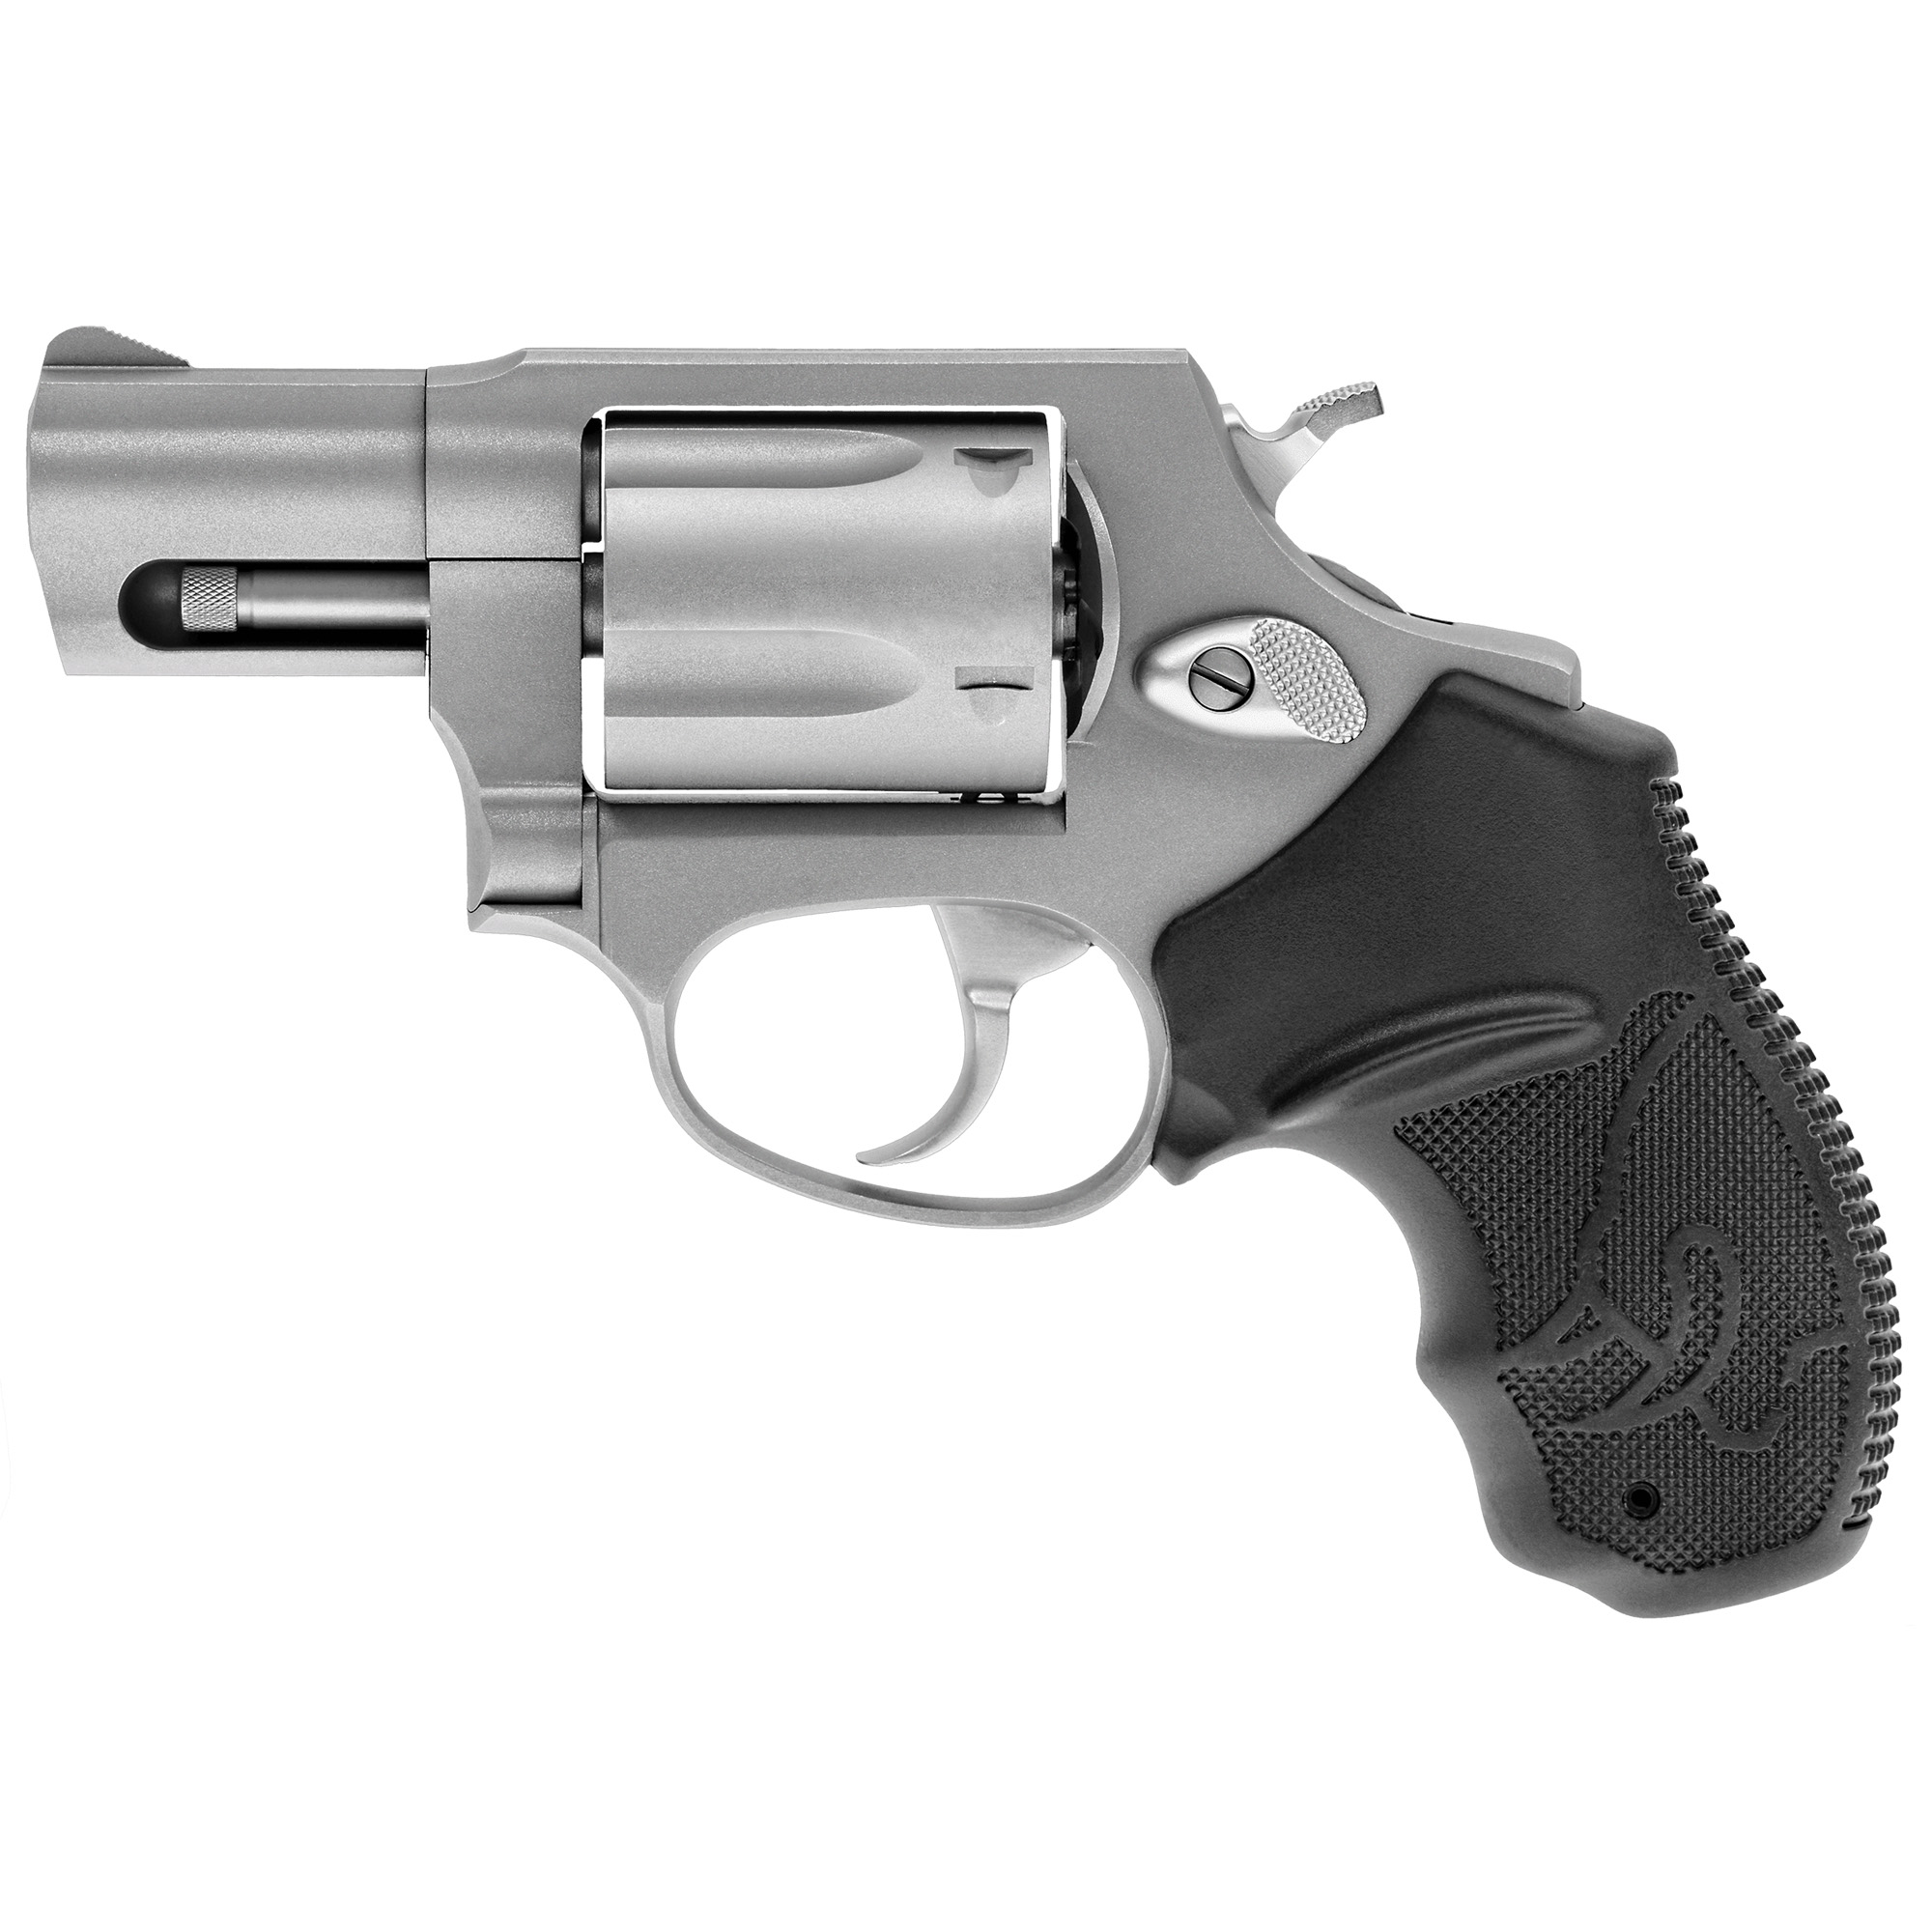 Taurus, Model 605, Double Action, Metal Frame Revolver, Small Frame, 357 Magnum, 2" Barrel, Stainless Steel, Matte Finish, Silver, Rubber Grips, Fixed Sights, 5 Rounds